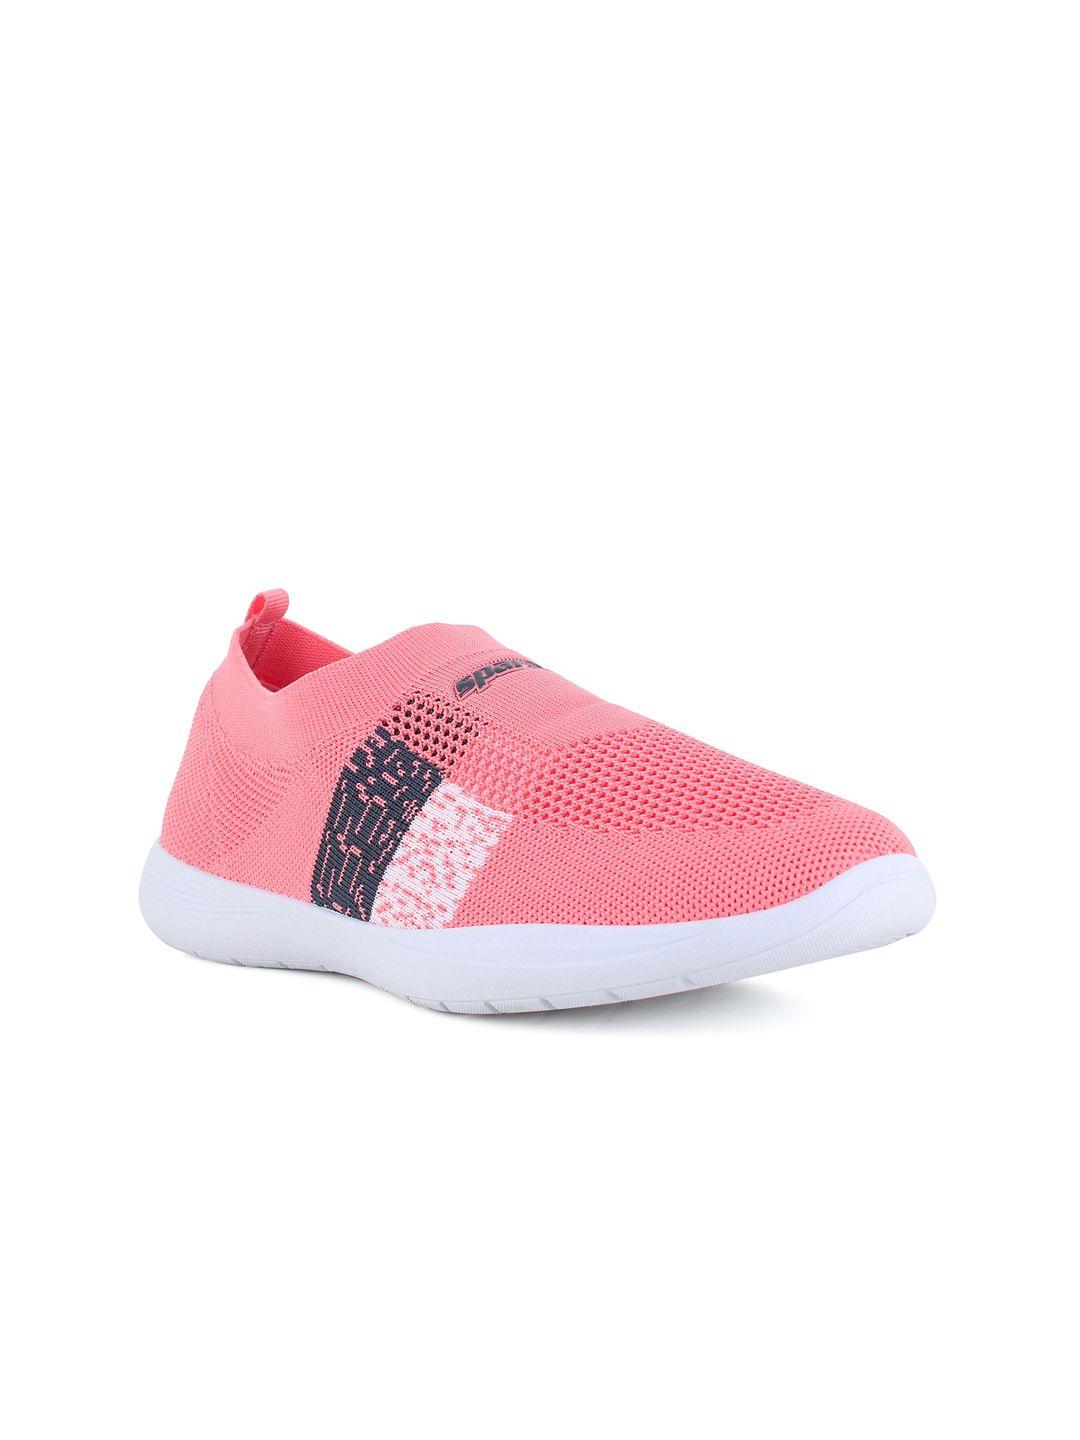 sparx women woven design comfort insole contrast sole slip-on sneakers